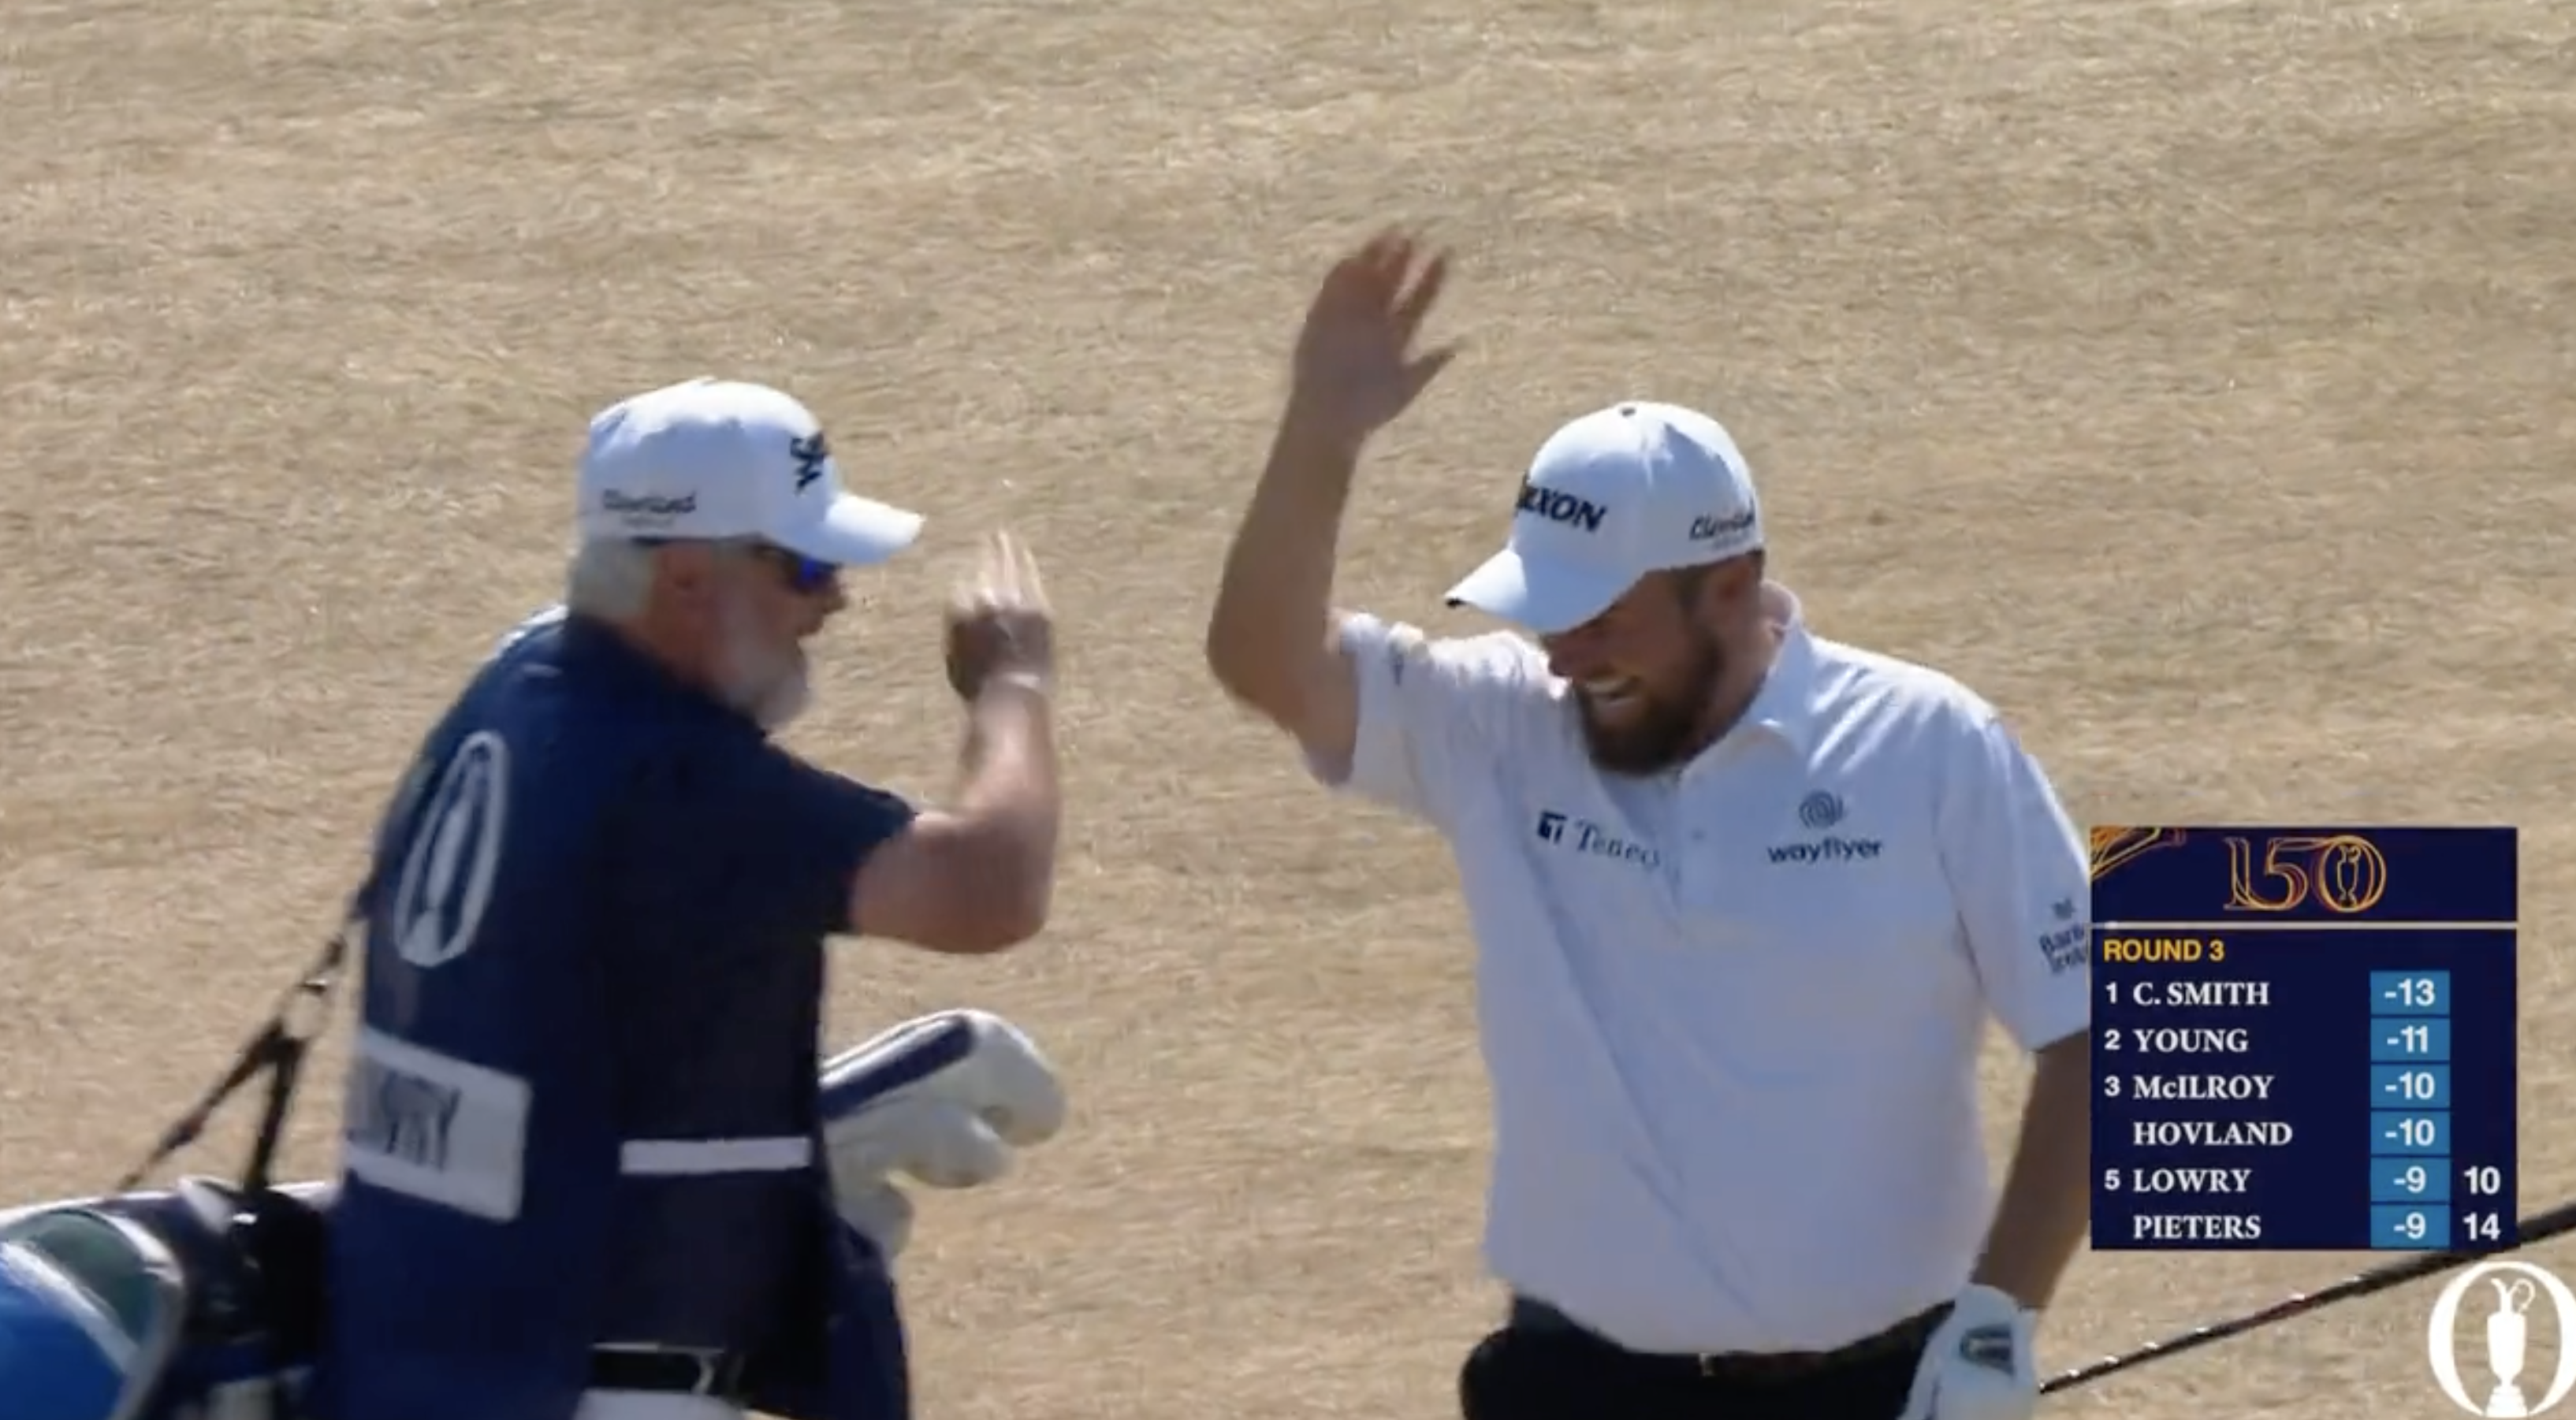 British Open 2022 Watch Shane Lowry dunk back-to-back eagles to send crowd into frenzy Golf News and Tour Information Golf Digest